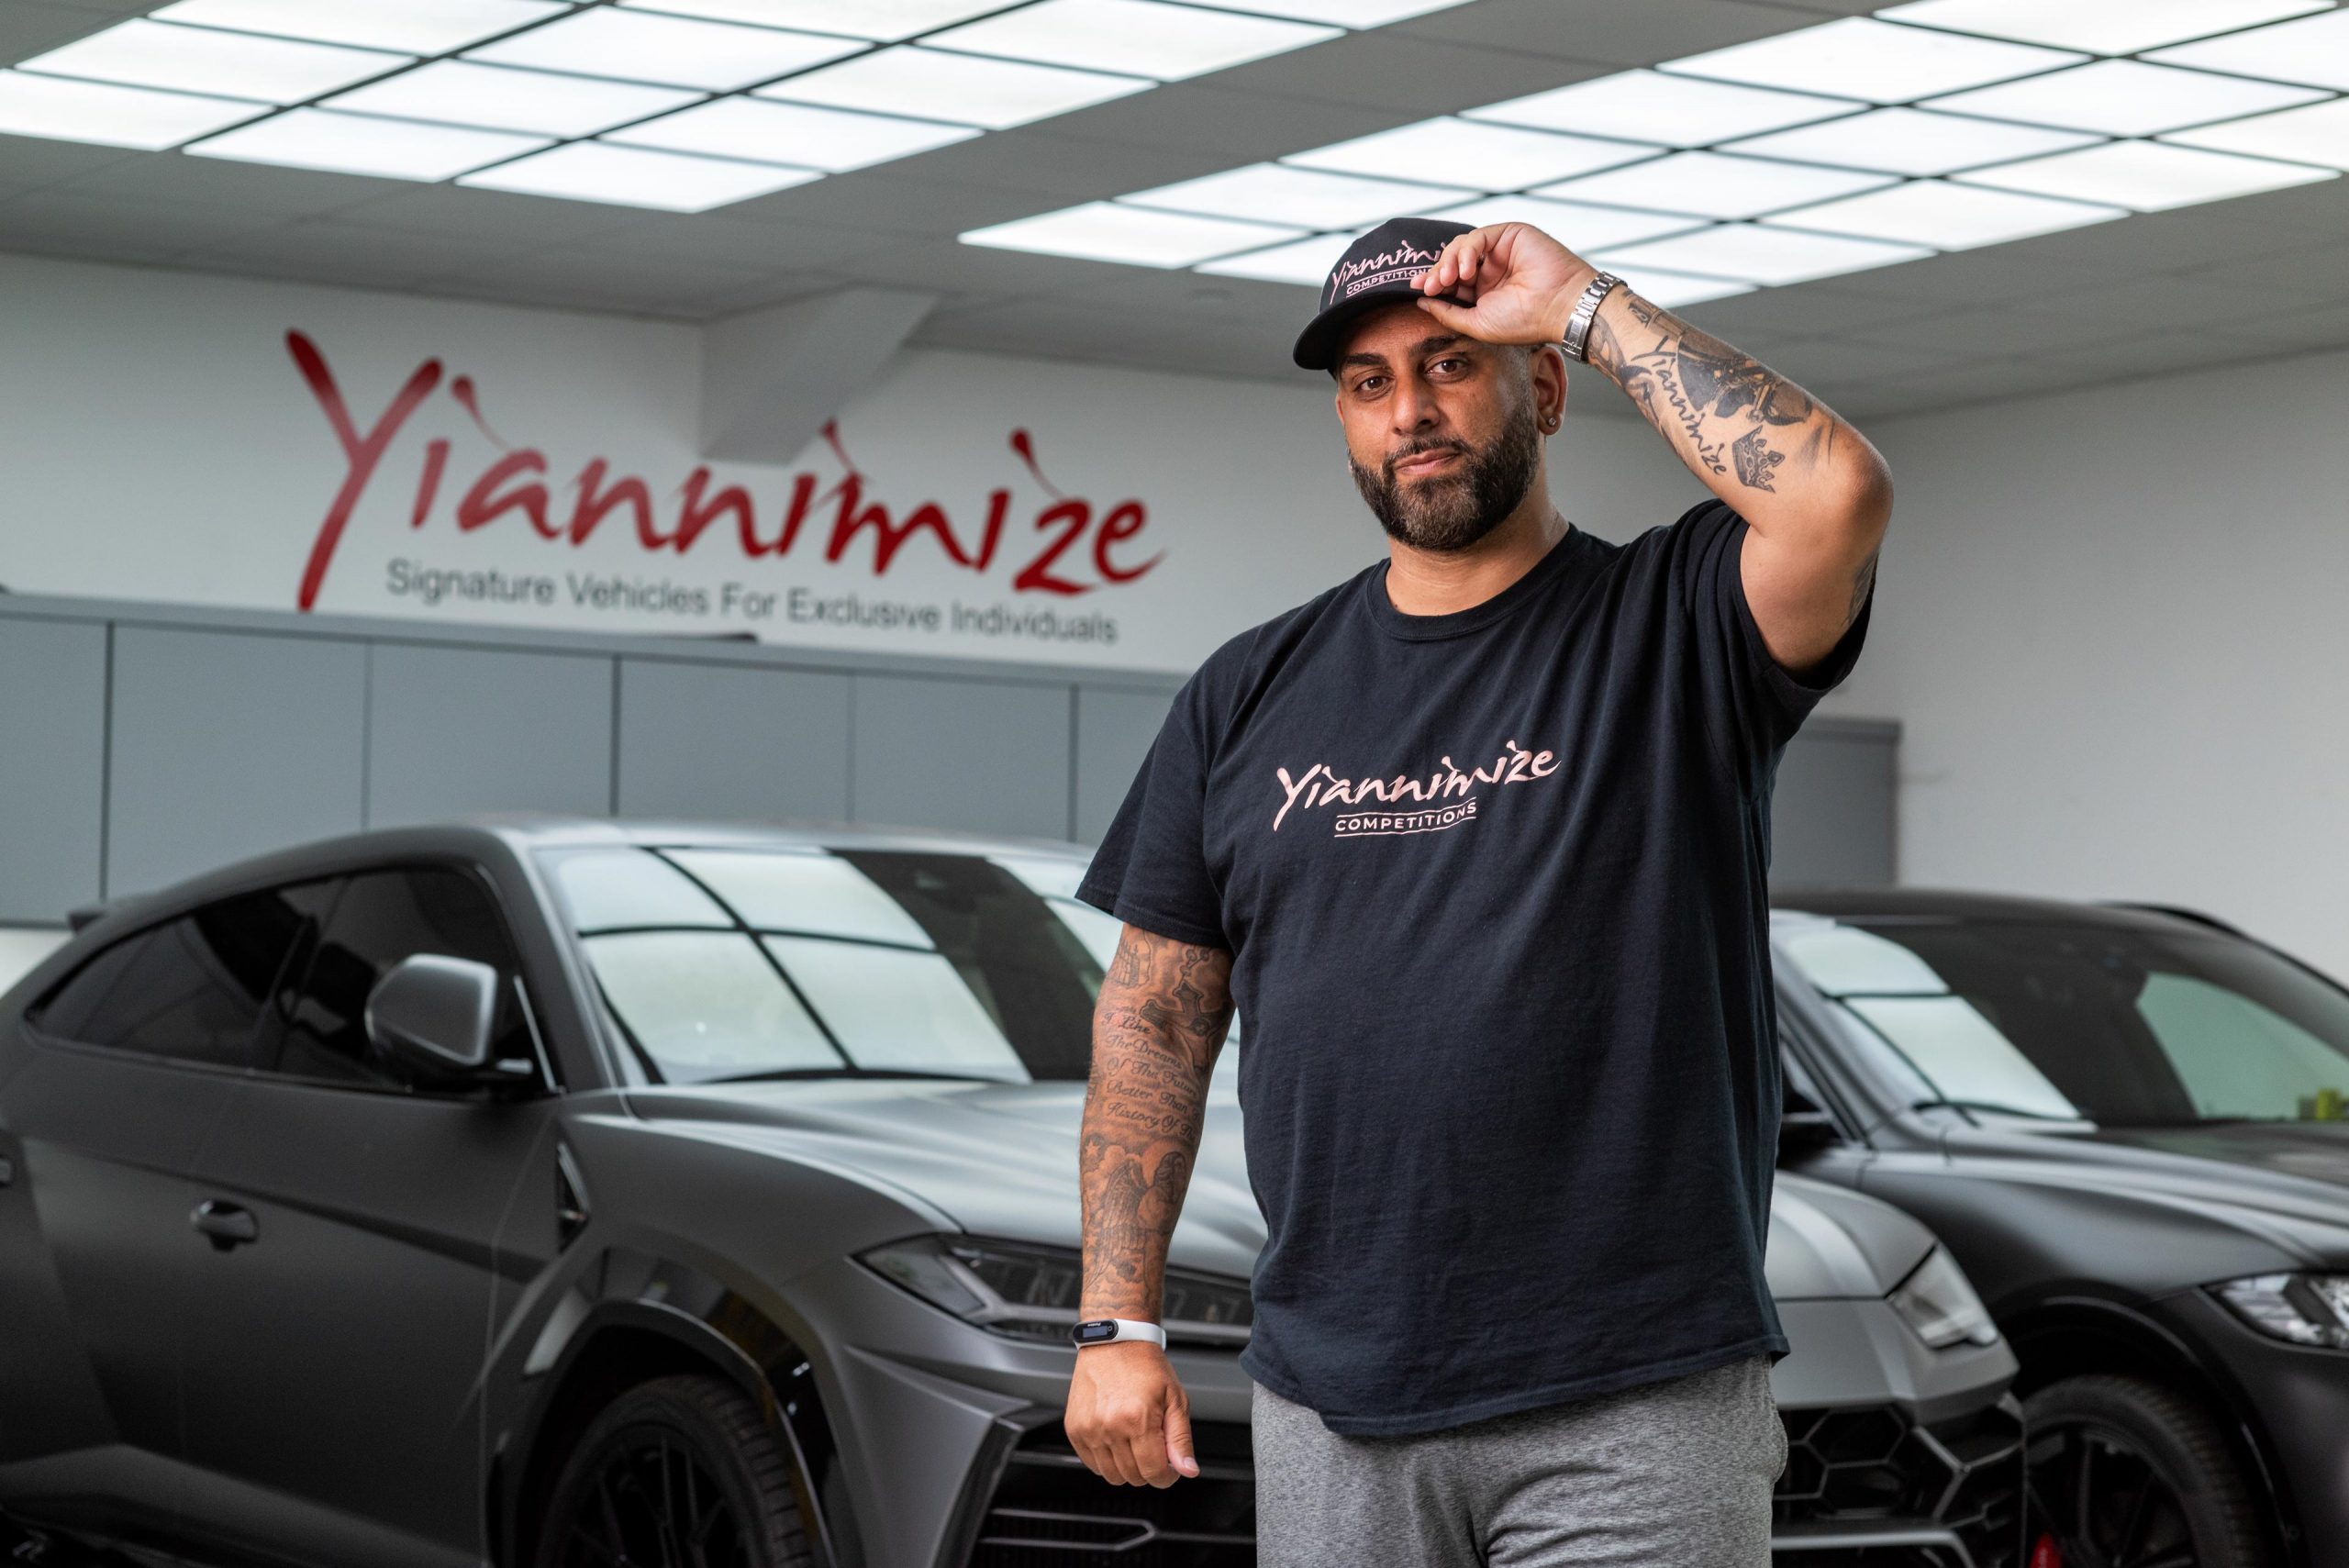 Yiannimize, the automotive enthusiast, poses in his garage with Lamborghinis in the background.